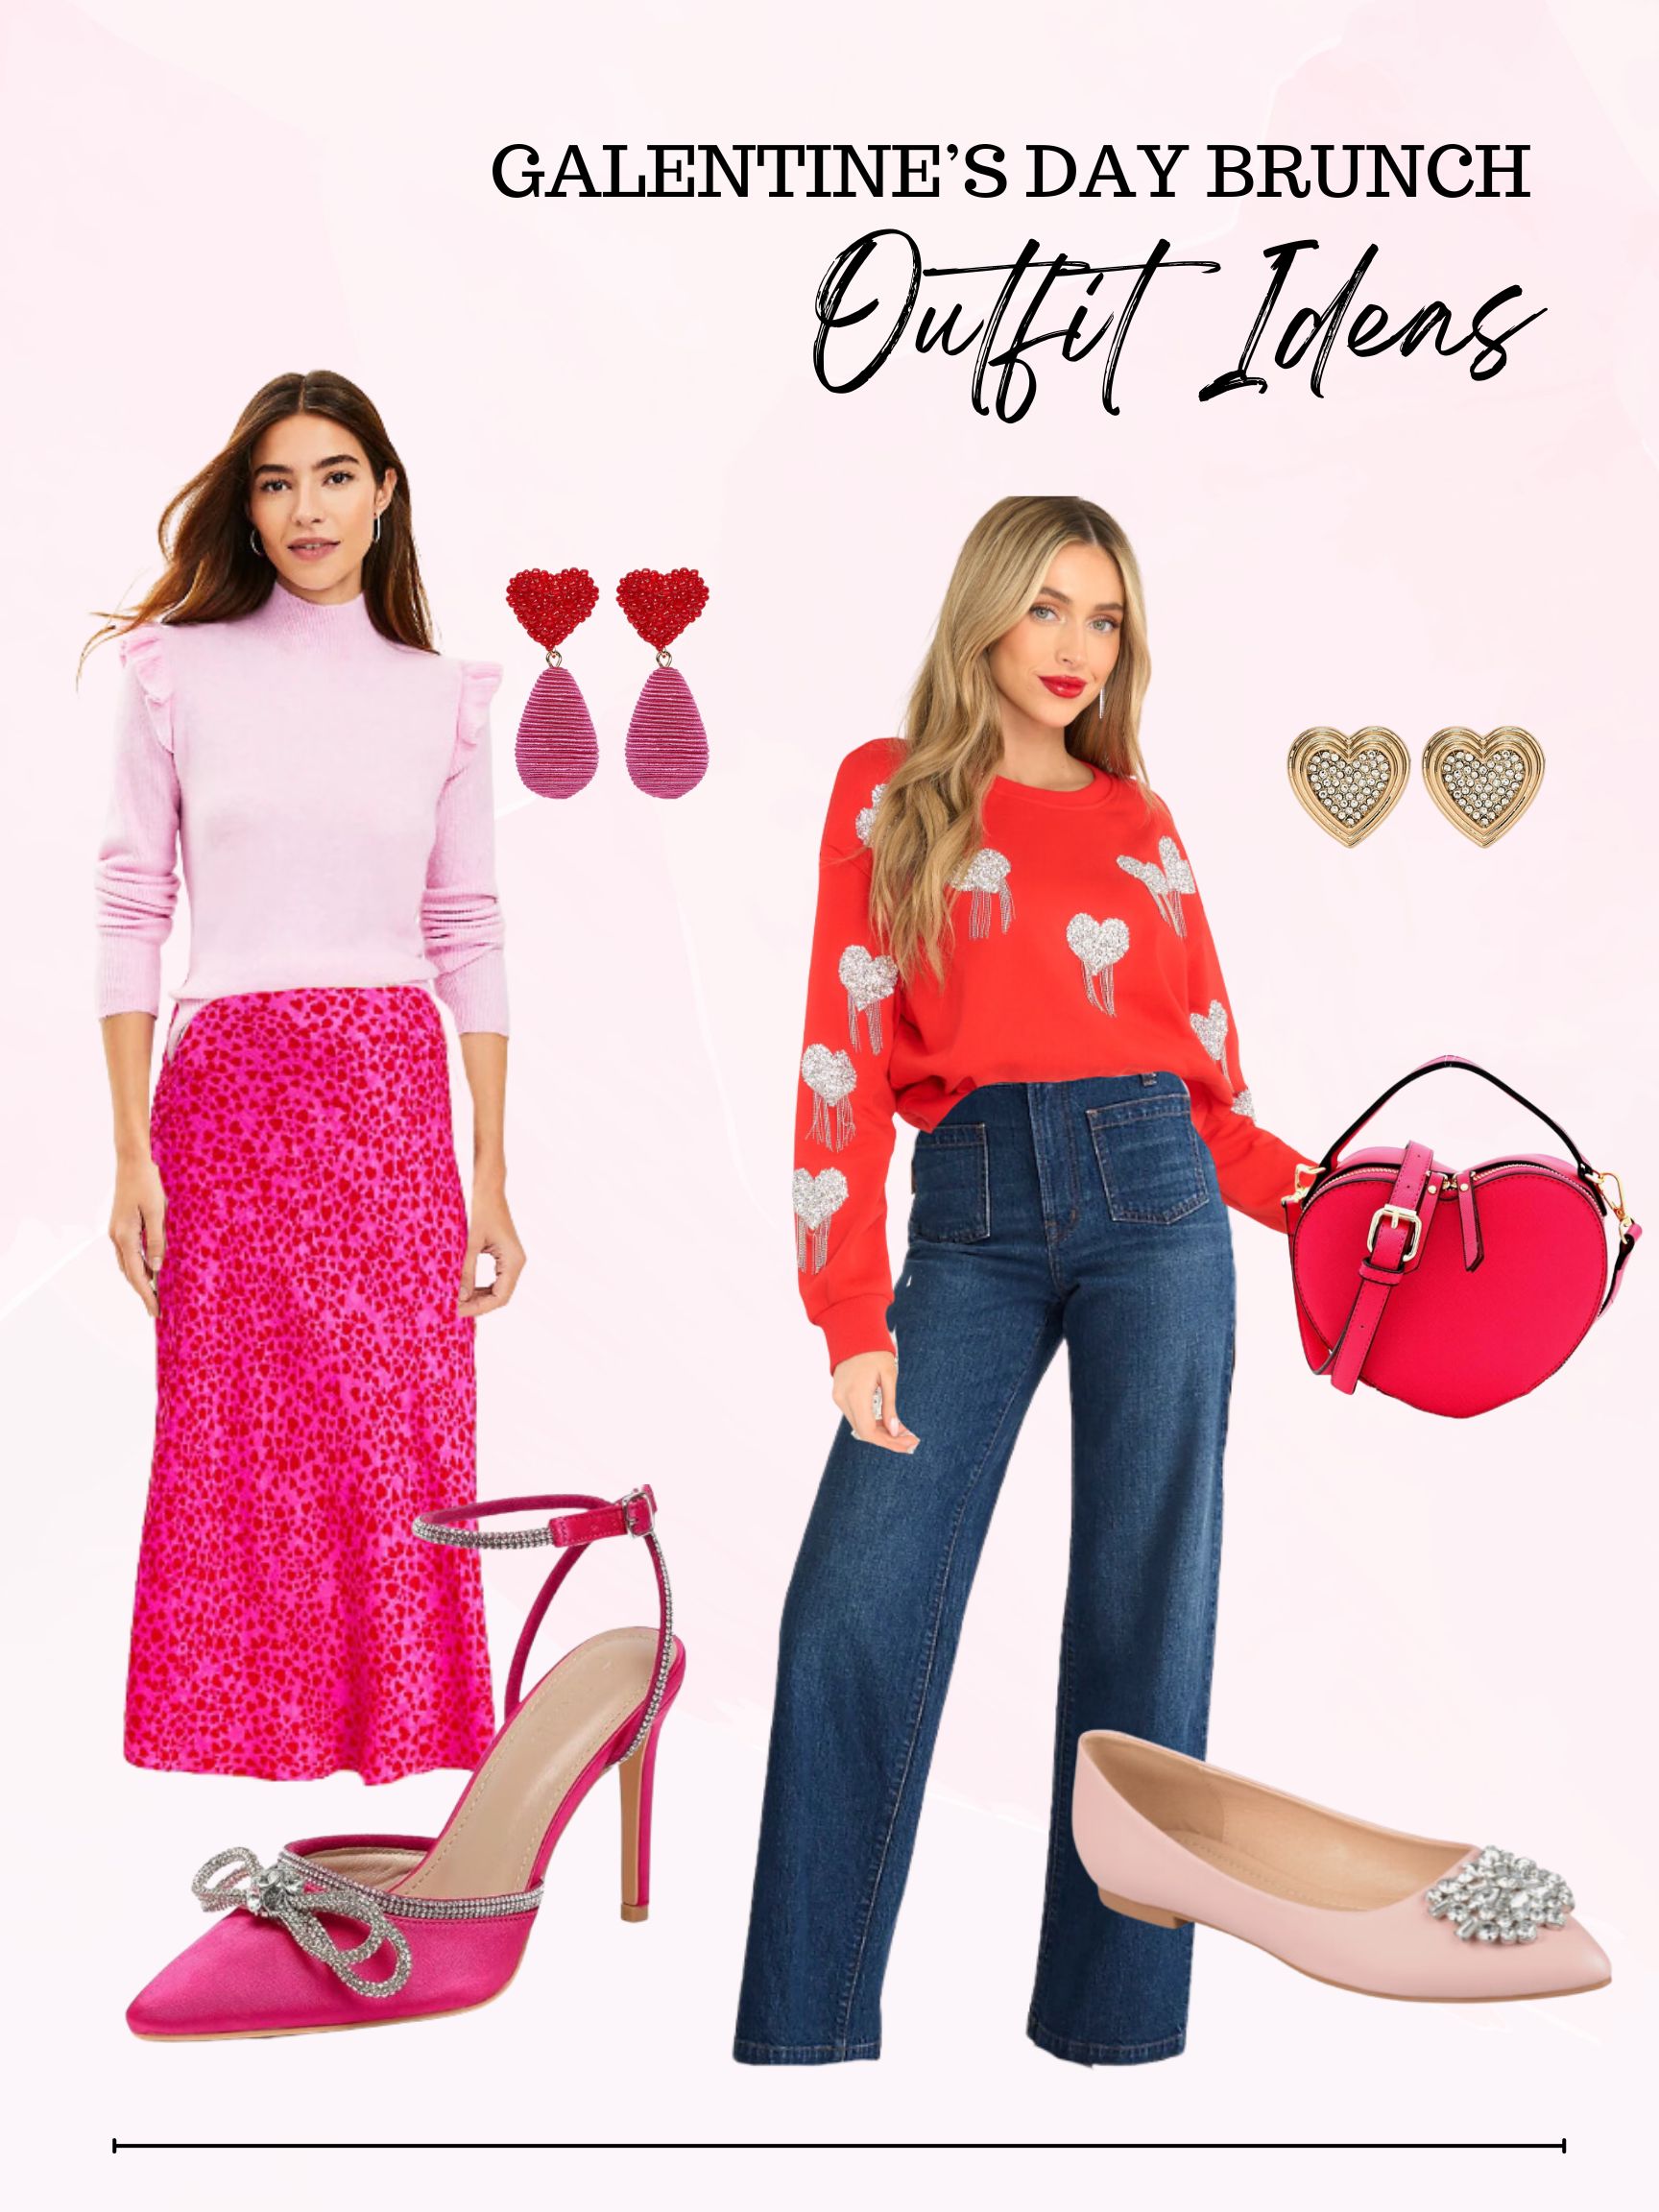 Galentine's Day Outfits for Brunch